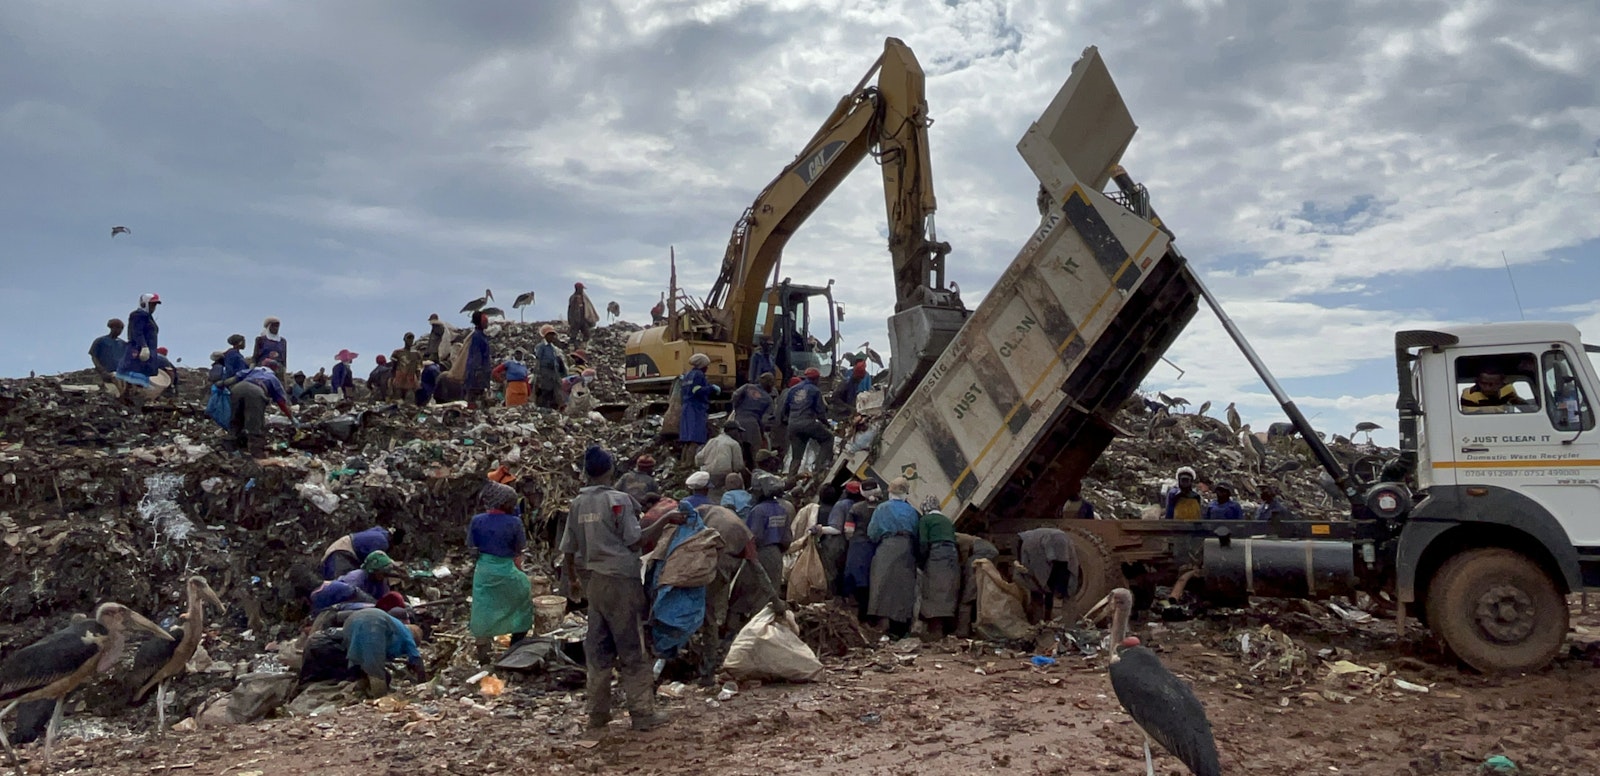 “A dump site itself is like the most horrific thing you can image on earth,” said Michael Tenbusch, president of International Samaritan. “There are no regulations, so you have human waste and medical waste coming together. We’re talking about mountains and mountains of garbage. Trucks start coming in at 4 a.m. and bring food from the hotels from the night before. So people who are struggling to eat show up at the dump and start grabbing food.” (Courtesy photo International Samaritan)